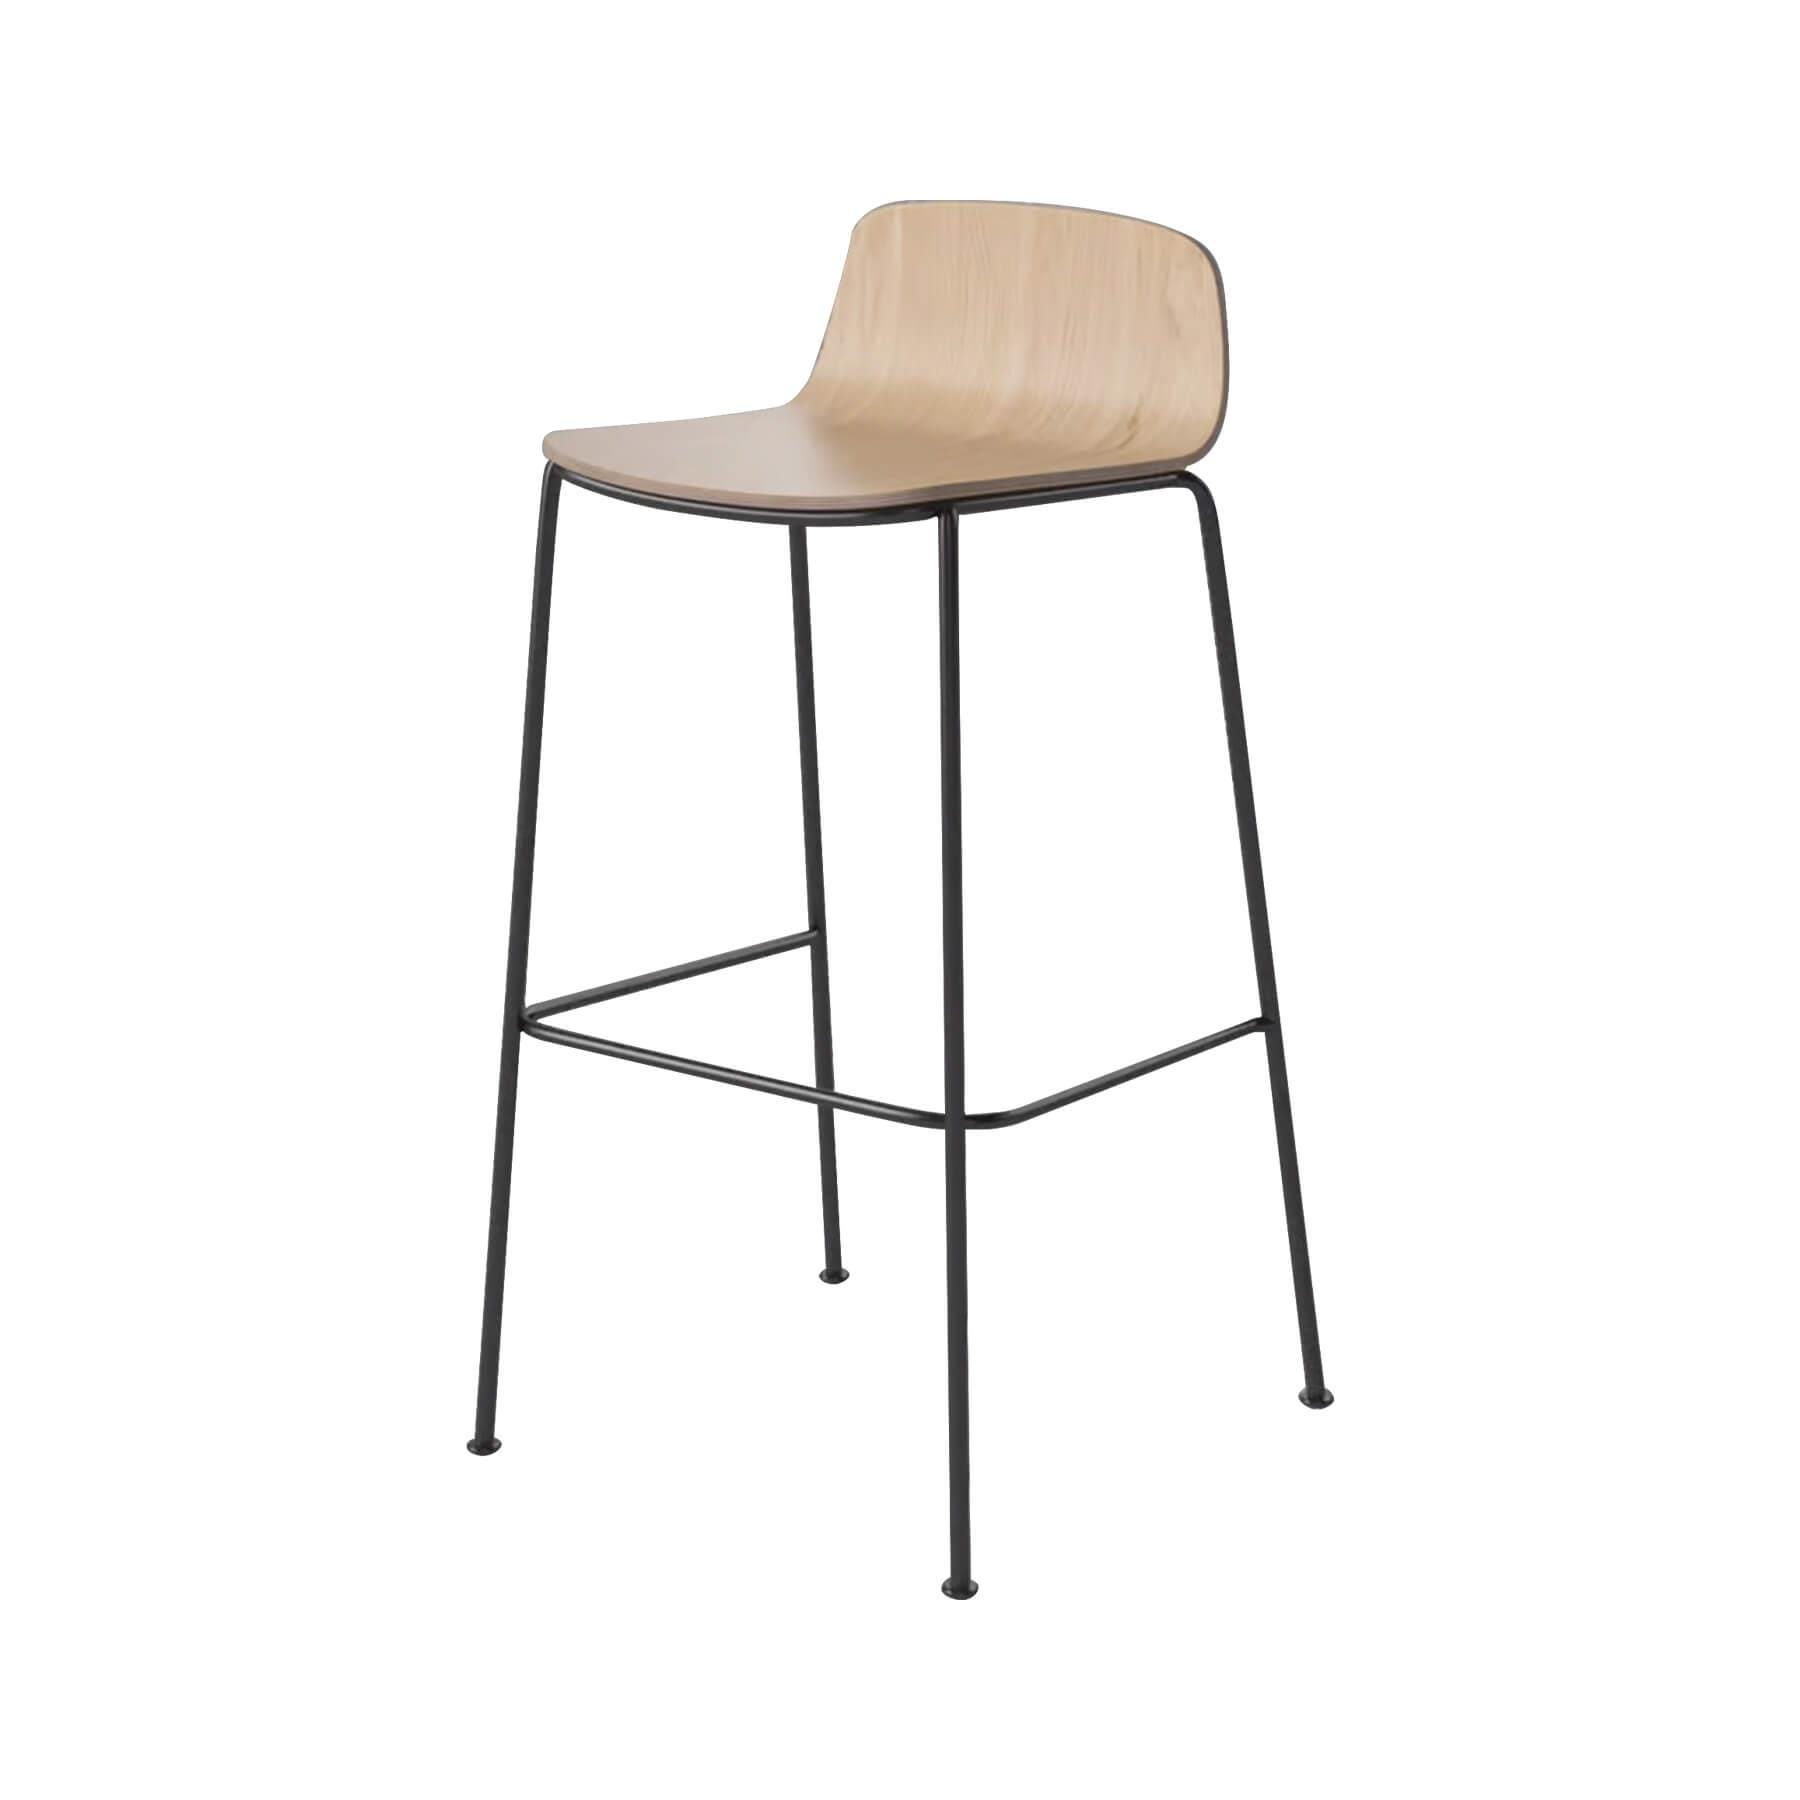 Bolia Palm Stool High Bar Stool White Oiled Oak Black Laquered Legs Light Wood Designer Furniture From Holloways Of Ludlow